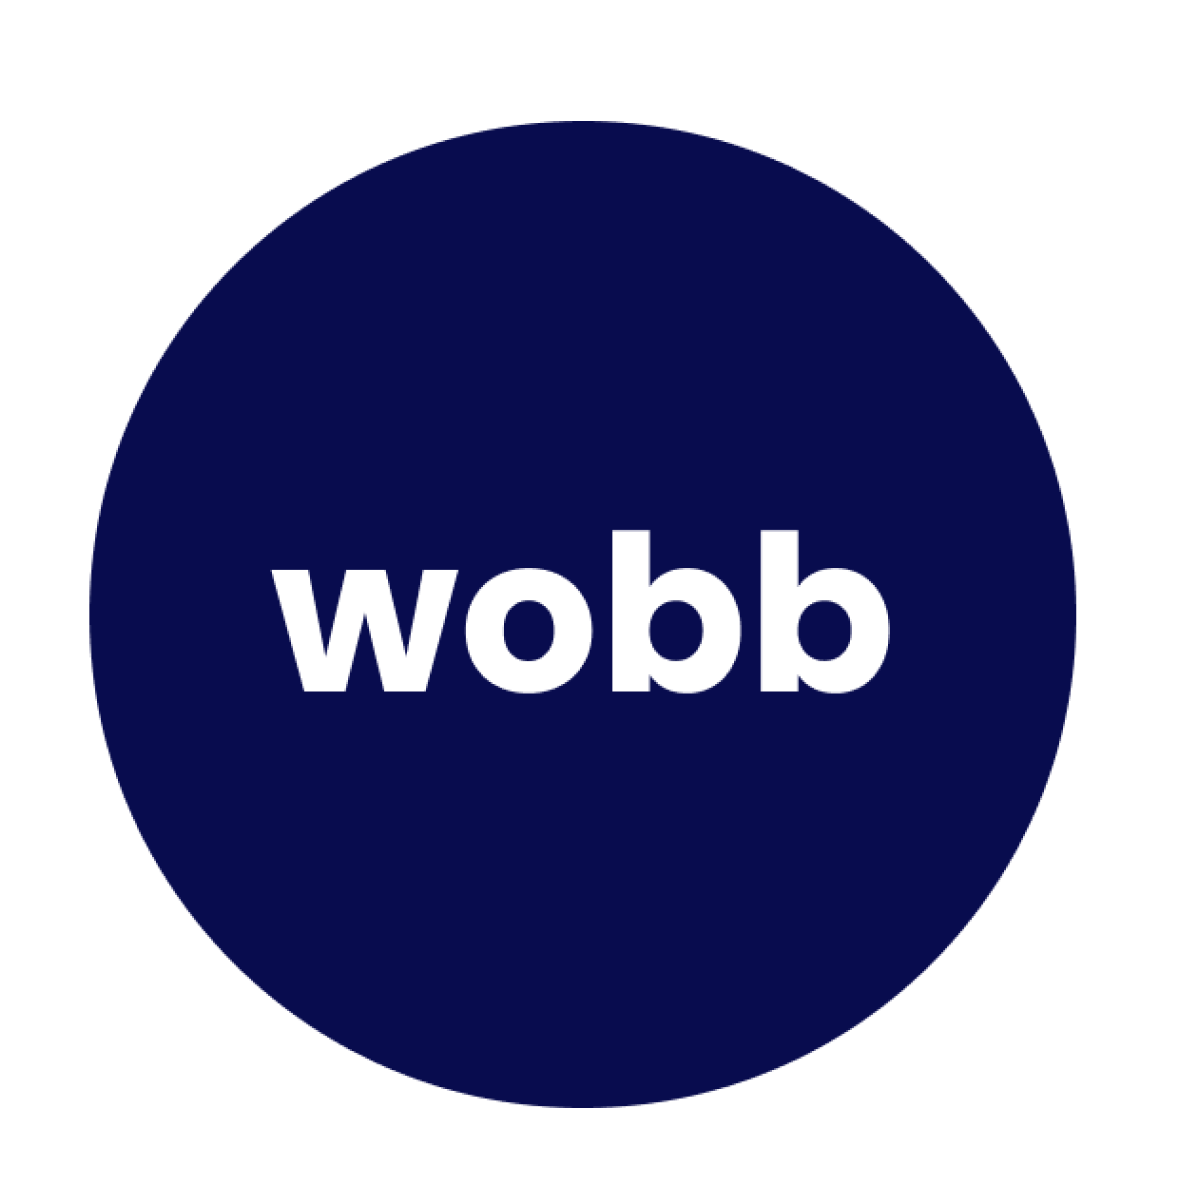 Hire Shopify Experts to integrate Wobb: Influencer Marketing app into a Shopify store